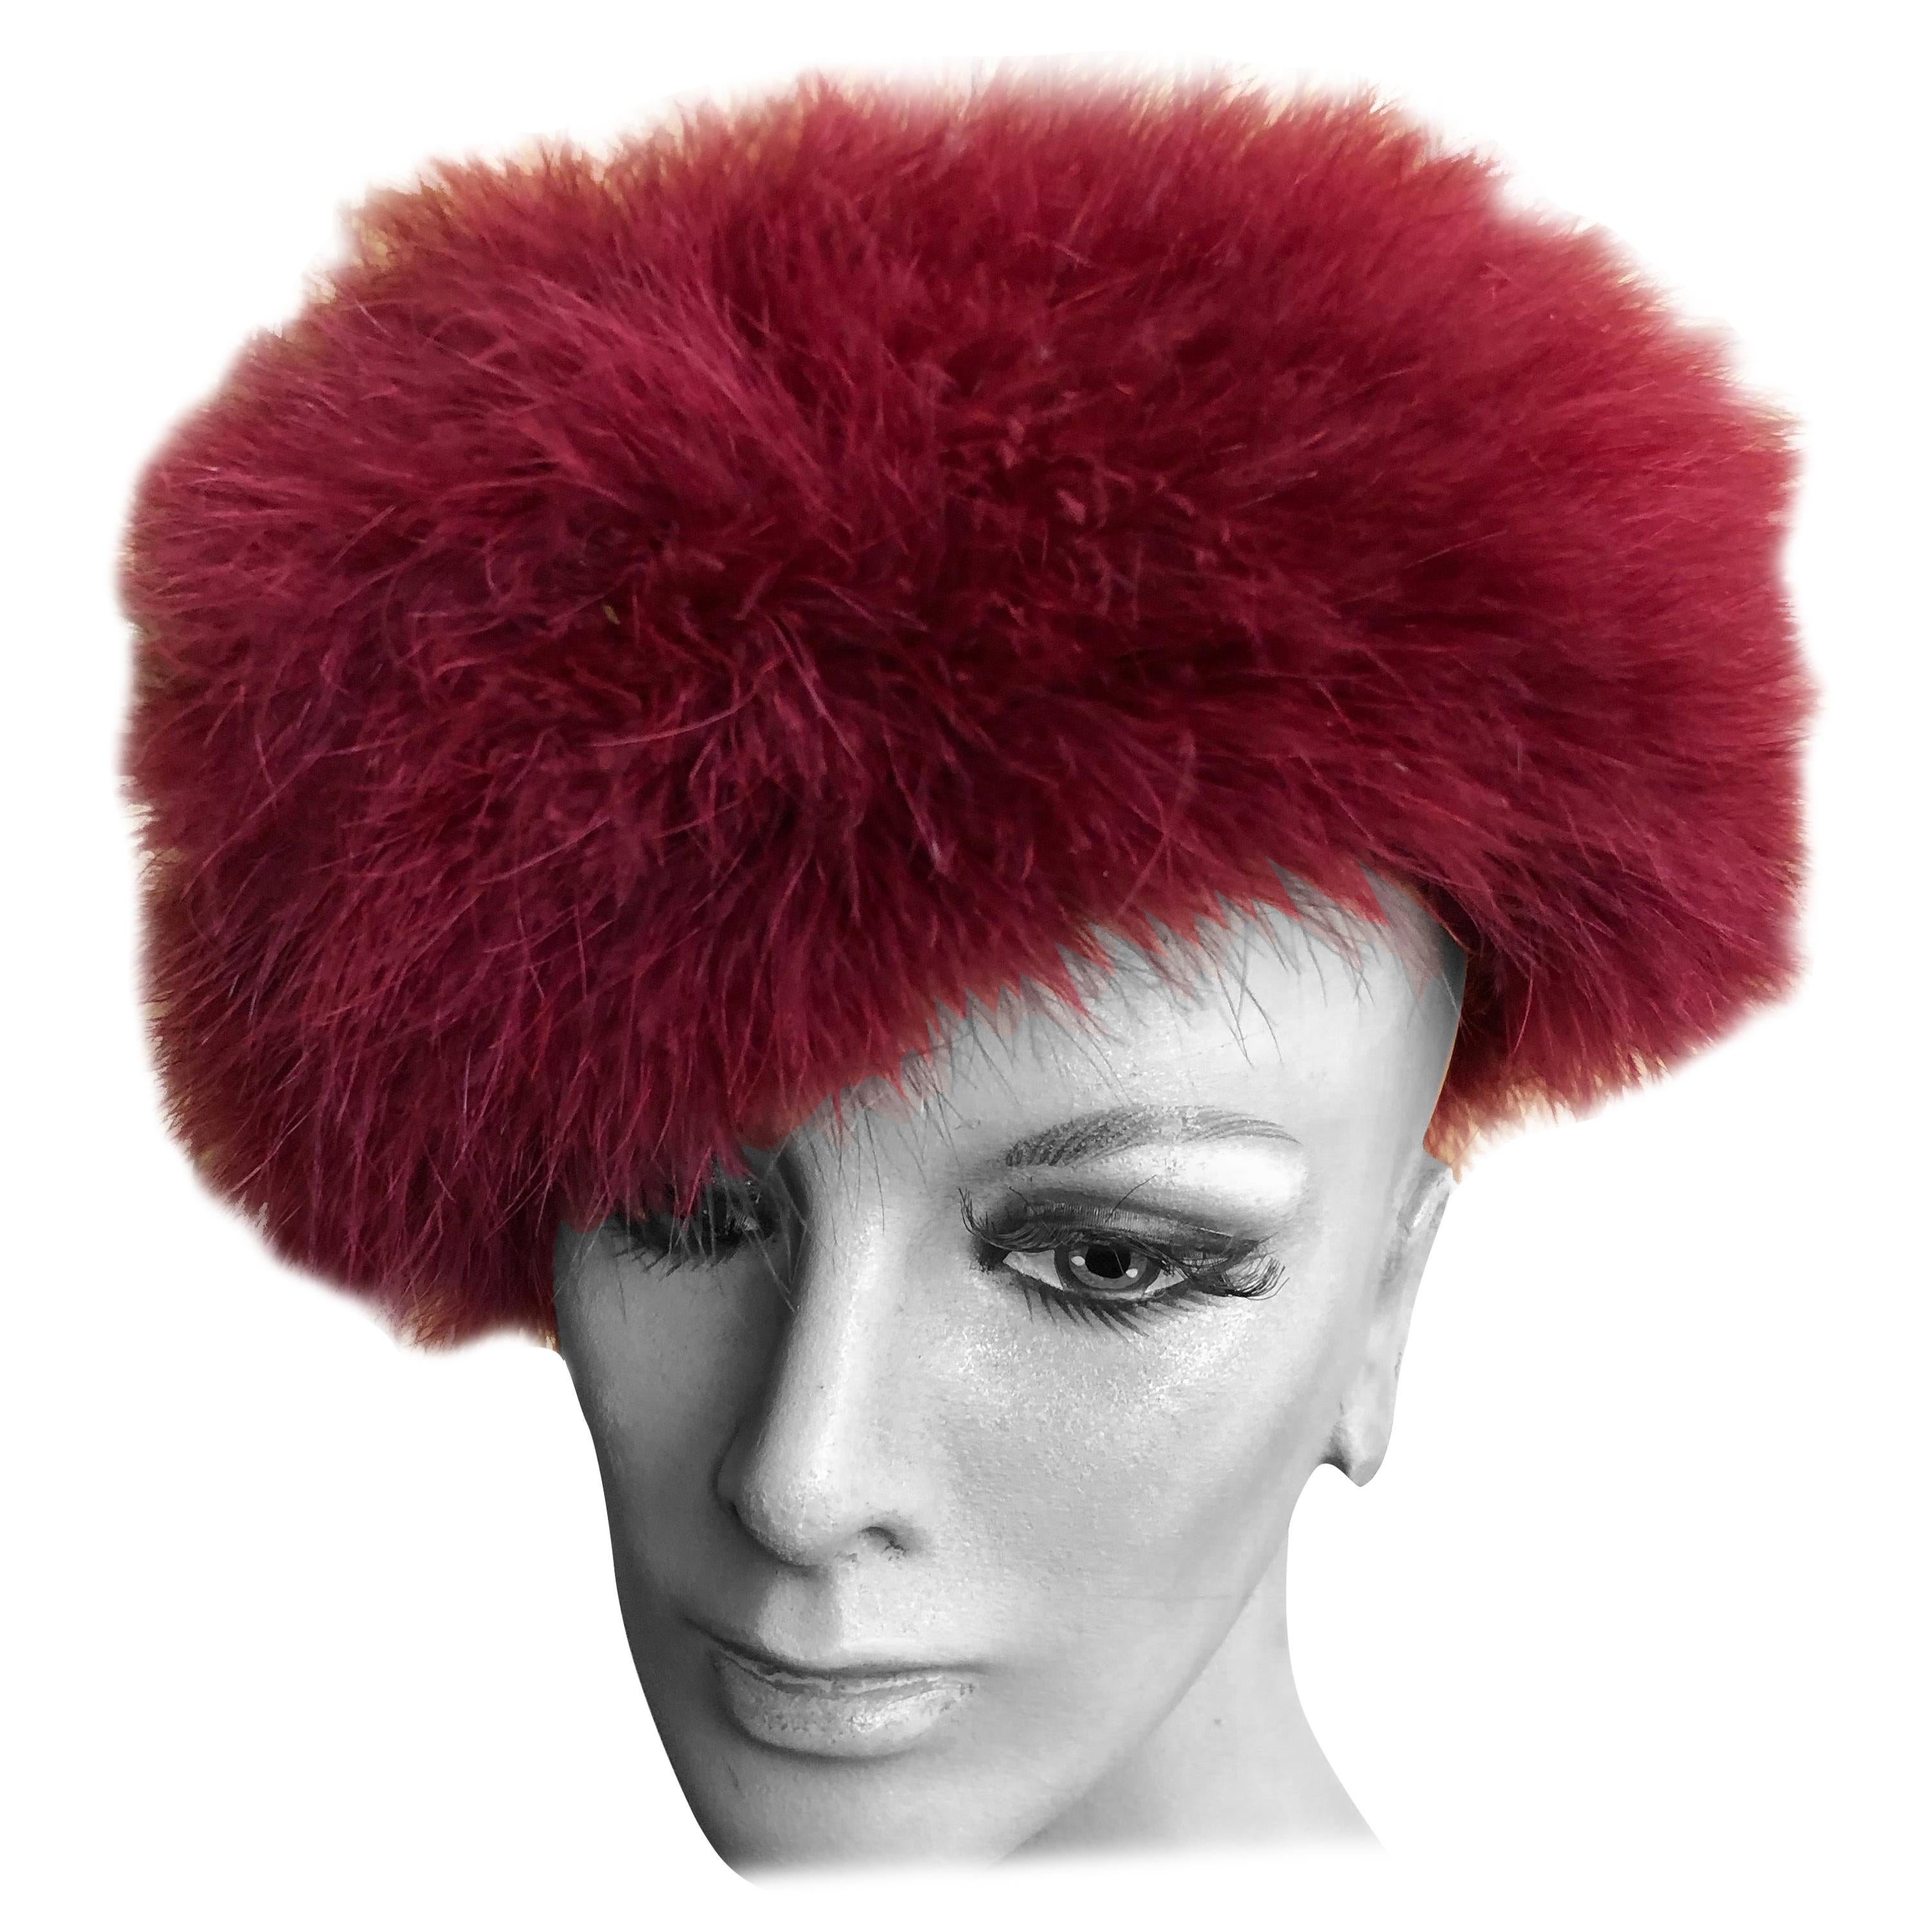 Marzi Firenze 1980's Red Feather Knit Beret Hat for Neiman Marcus For Sale